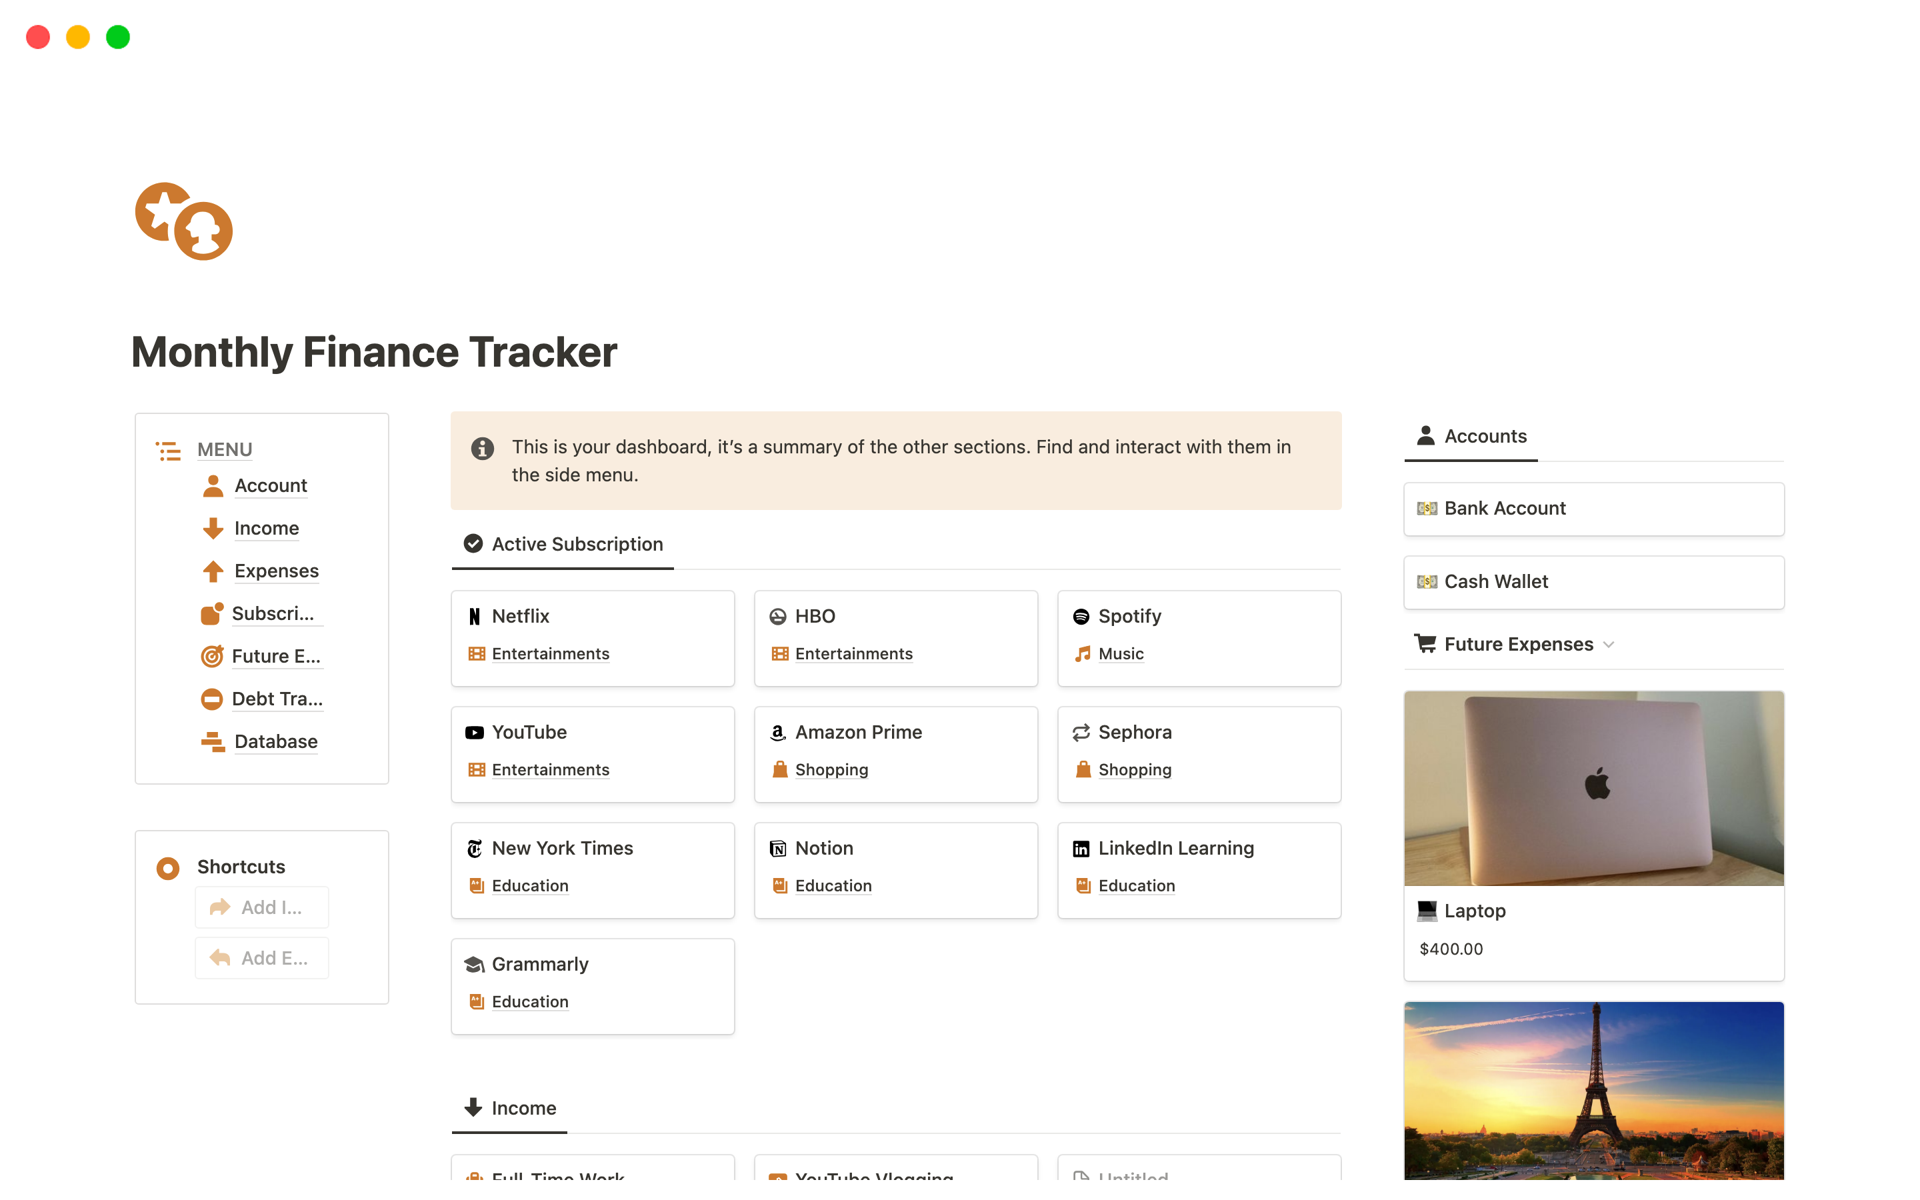 Track all your finances: income, expenses, debt, subscription, future goals.